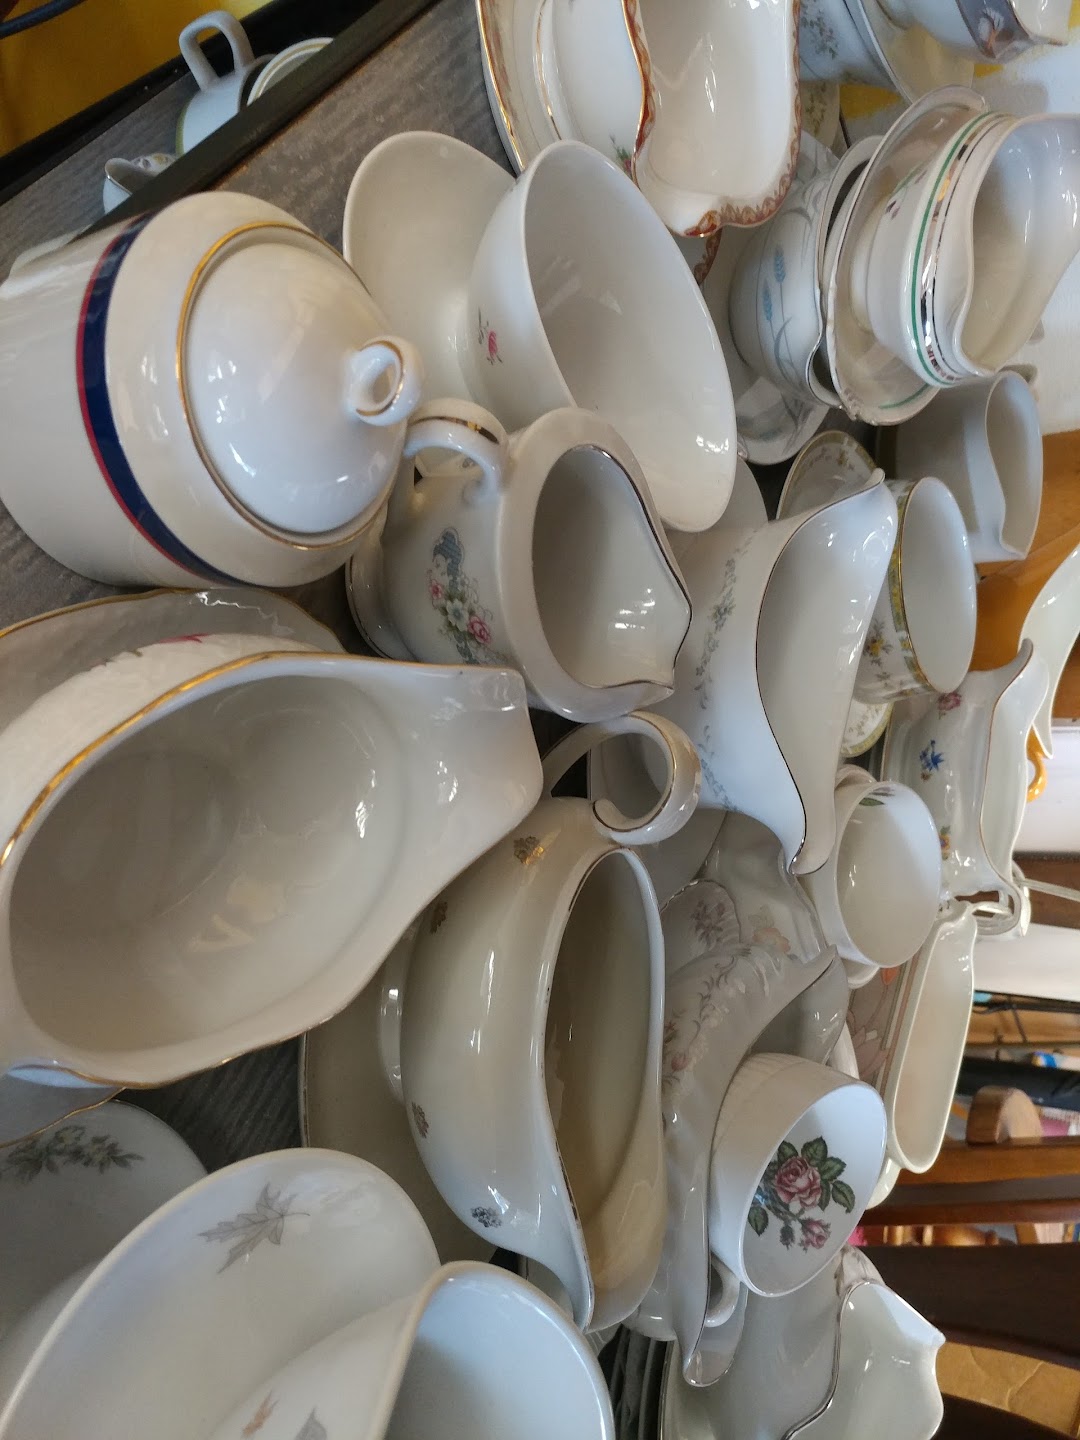 South Floridas Largest Collection Of Fine China, Cream, Sugar Dishes, Gravy Boats And Soup Tureens